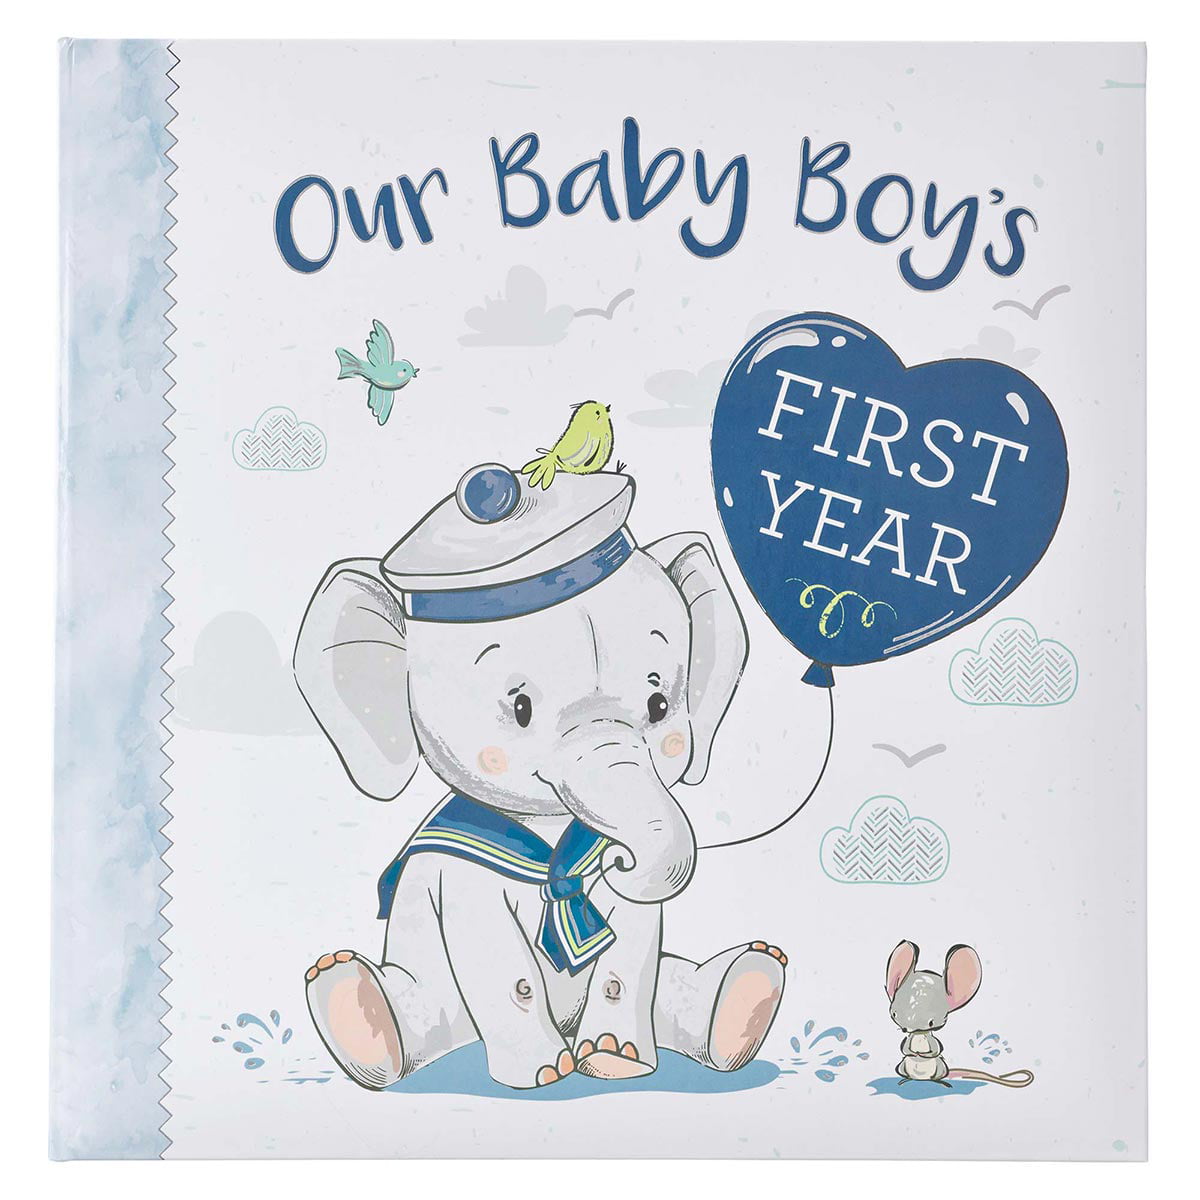 Christian Art Gifts Boy Baby Book of Memories Blue Keepsake Photo Album  Our Baby Boy's First Year Memory Book  Baby Book with Bible Verses [Hardcover] Christian Art Publishers